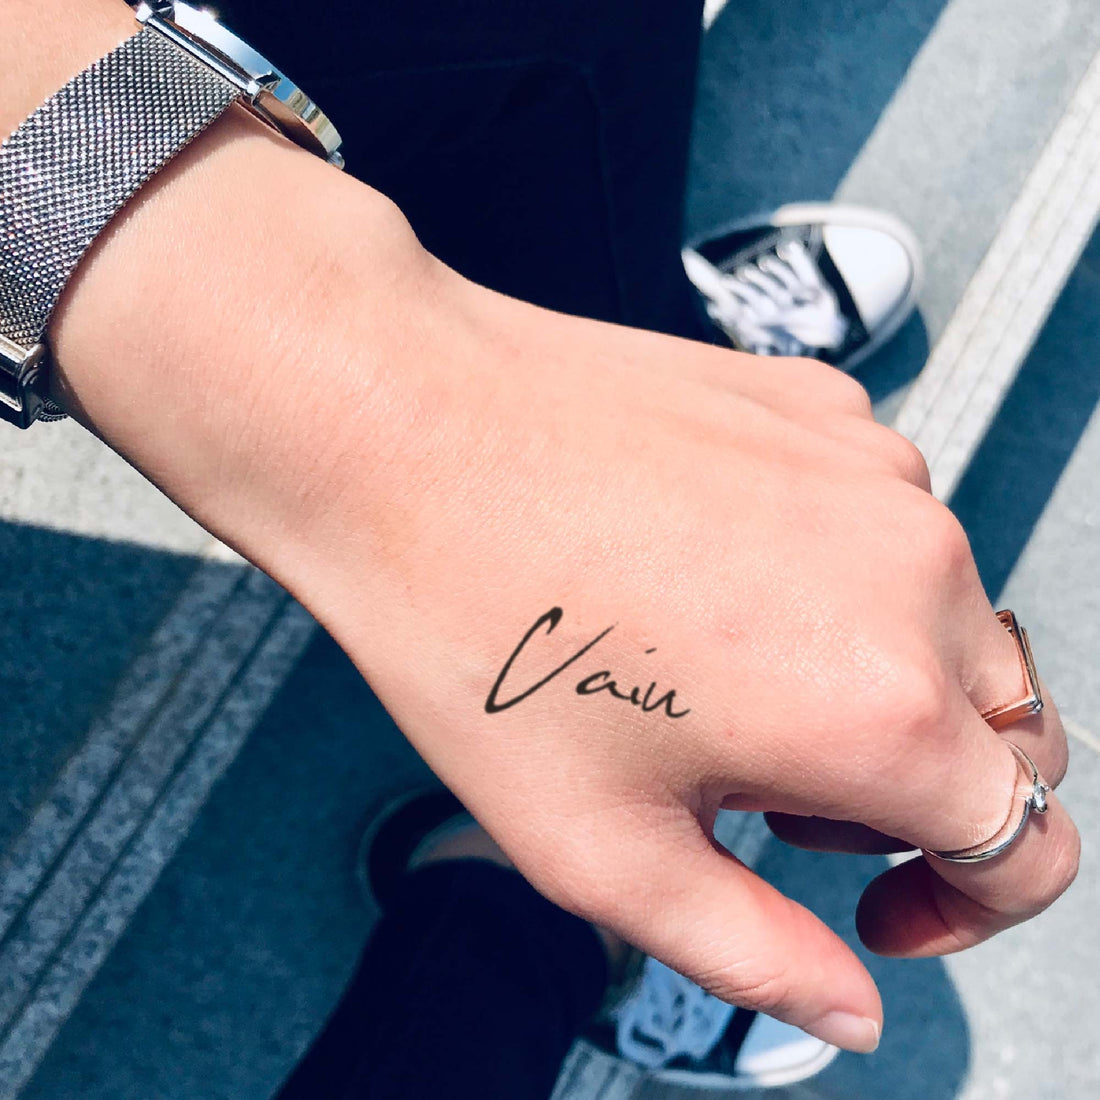 Cain custom temporary tattoo sticker design idea inspiration meanings removal arm wrist hand words font name signature calligraphy lyrics tour concert outfits merch accessory gift souvenir costumes wear dress up code